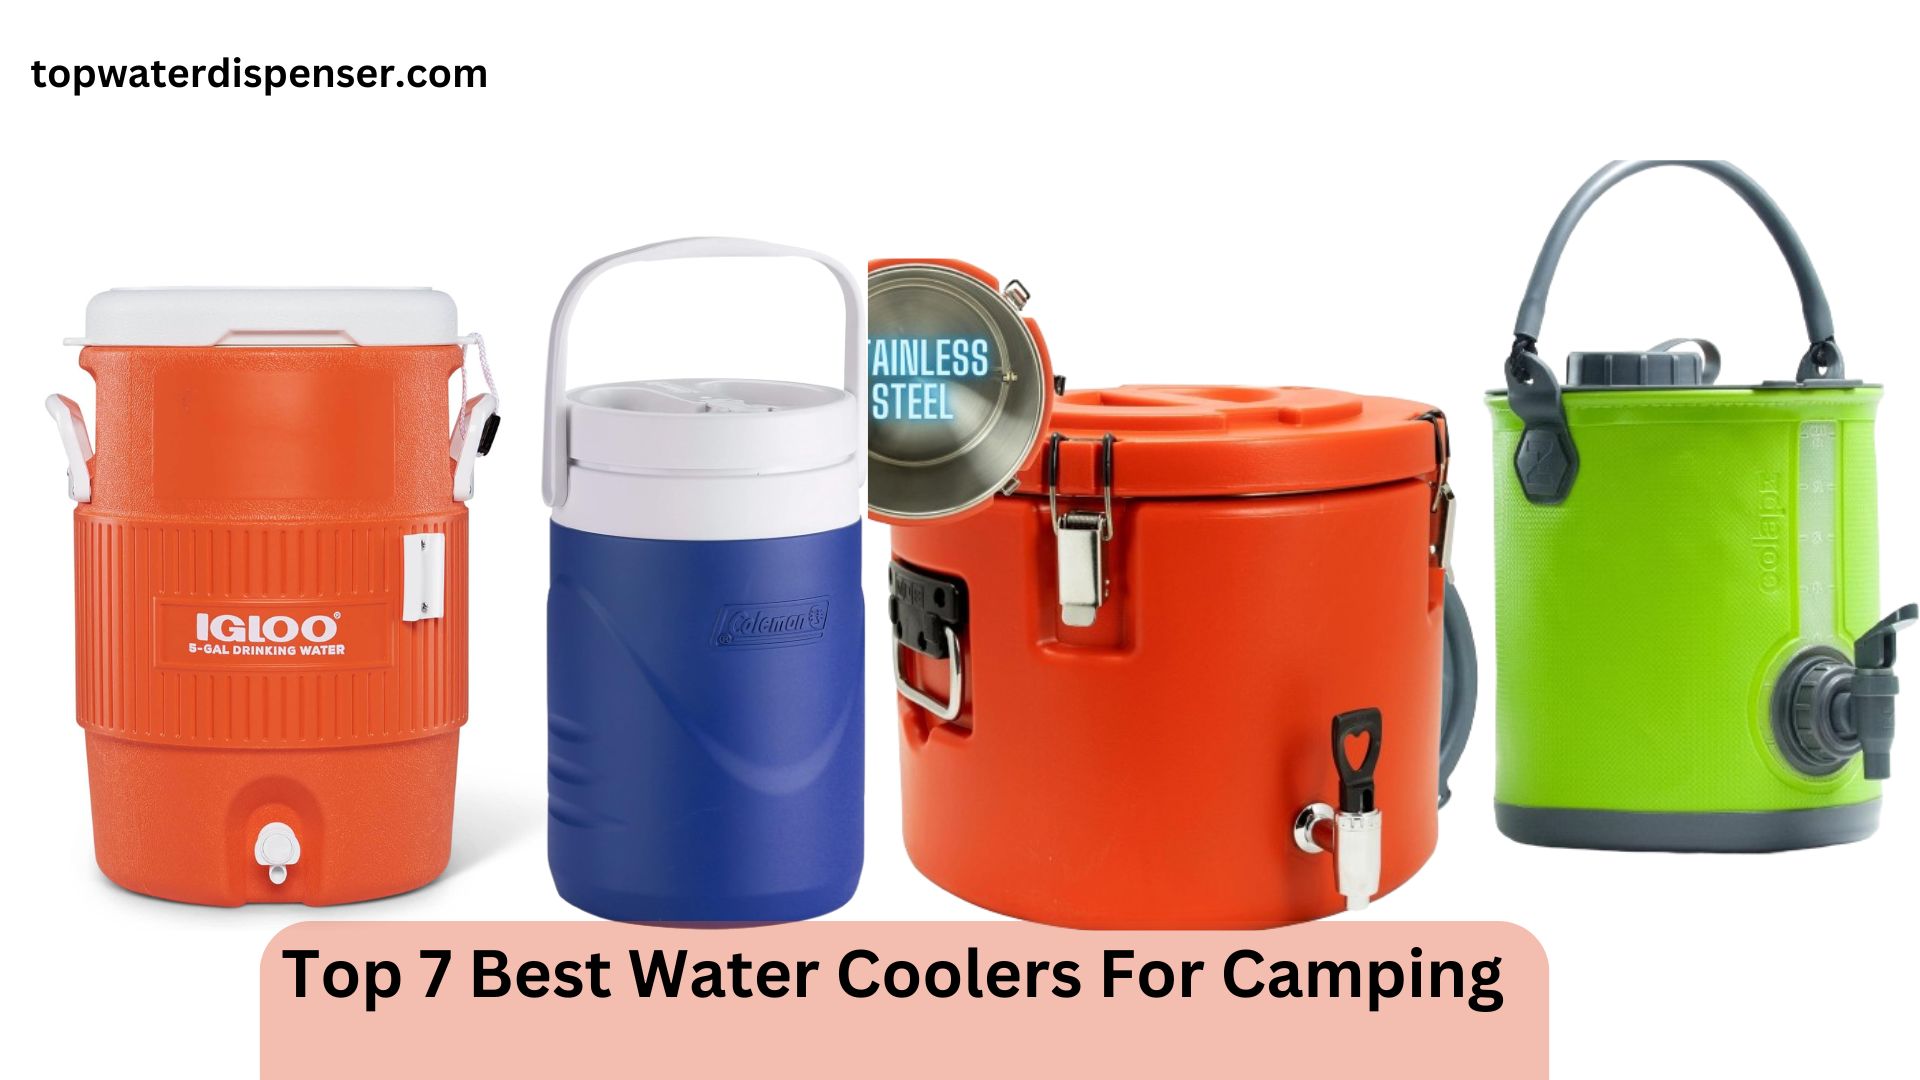 Top 7 Best Water Coolers For Camping